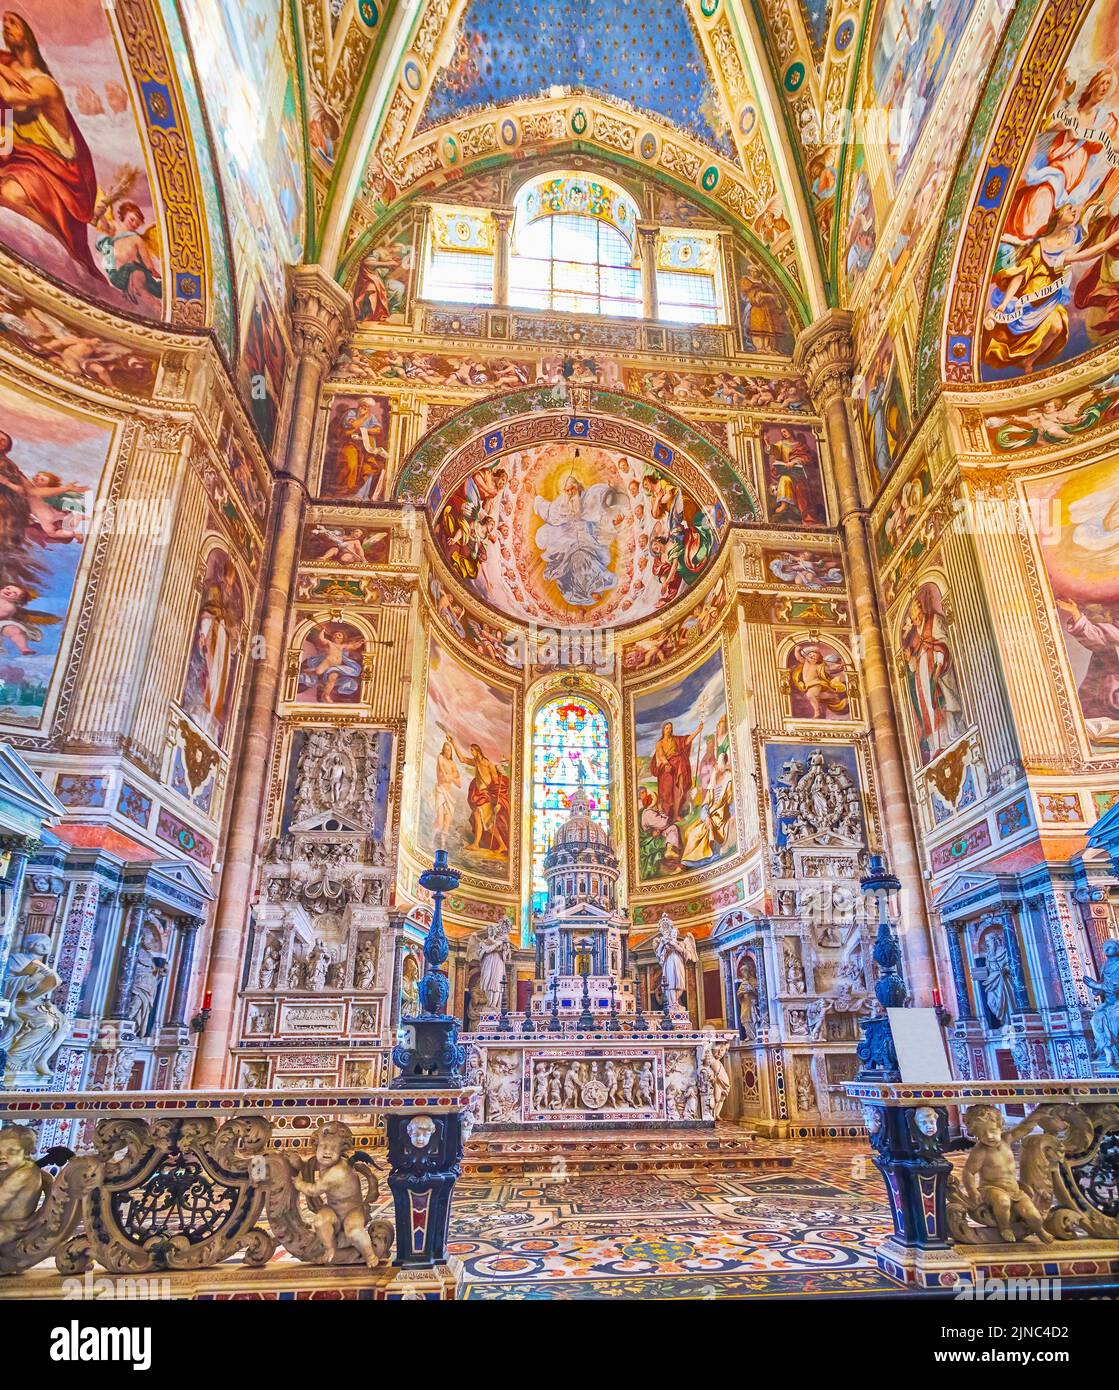 CERTOSA DI PAVIA, ITALY - APRIL 9, 2022: The outstanding painted walls and the high Altar of Certosa di Pavia monastery, on April 9 in Certosa di Pavi Stock Photo